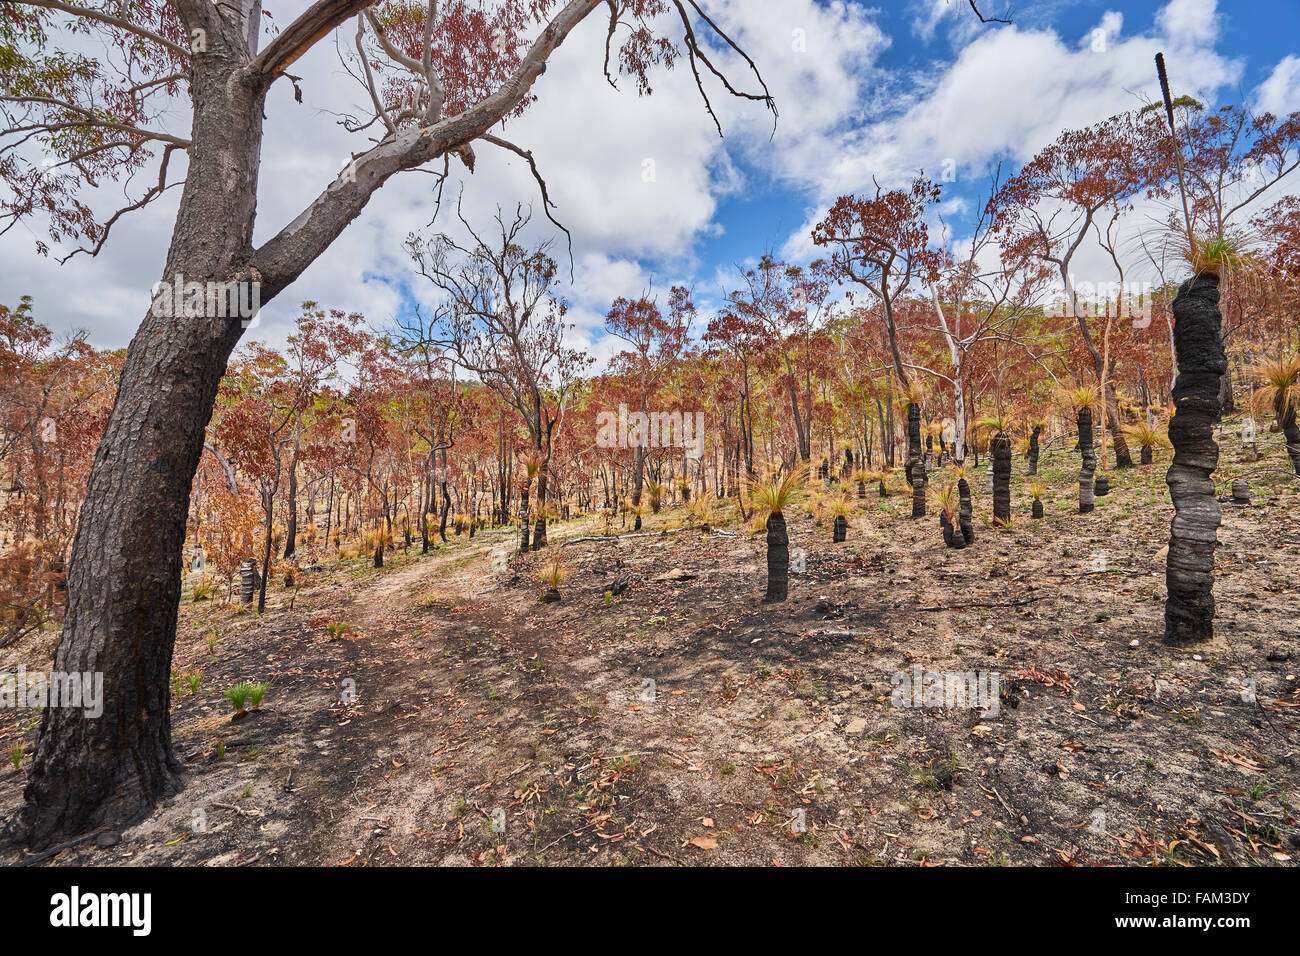 An forrest in Australia's Northern Territory, after a recent bush fire Stock Photo